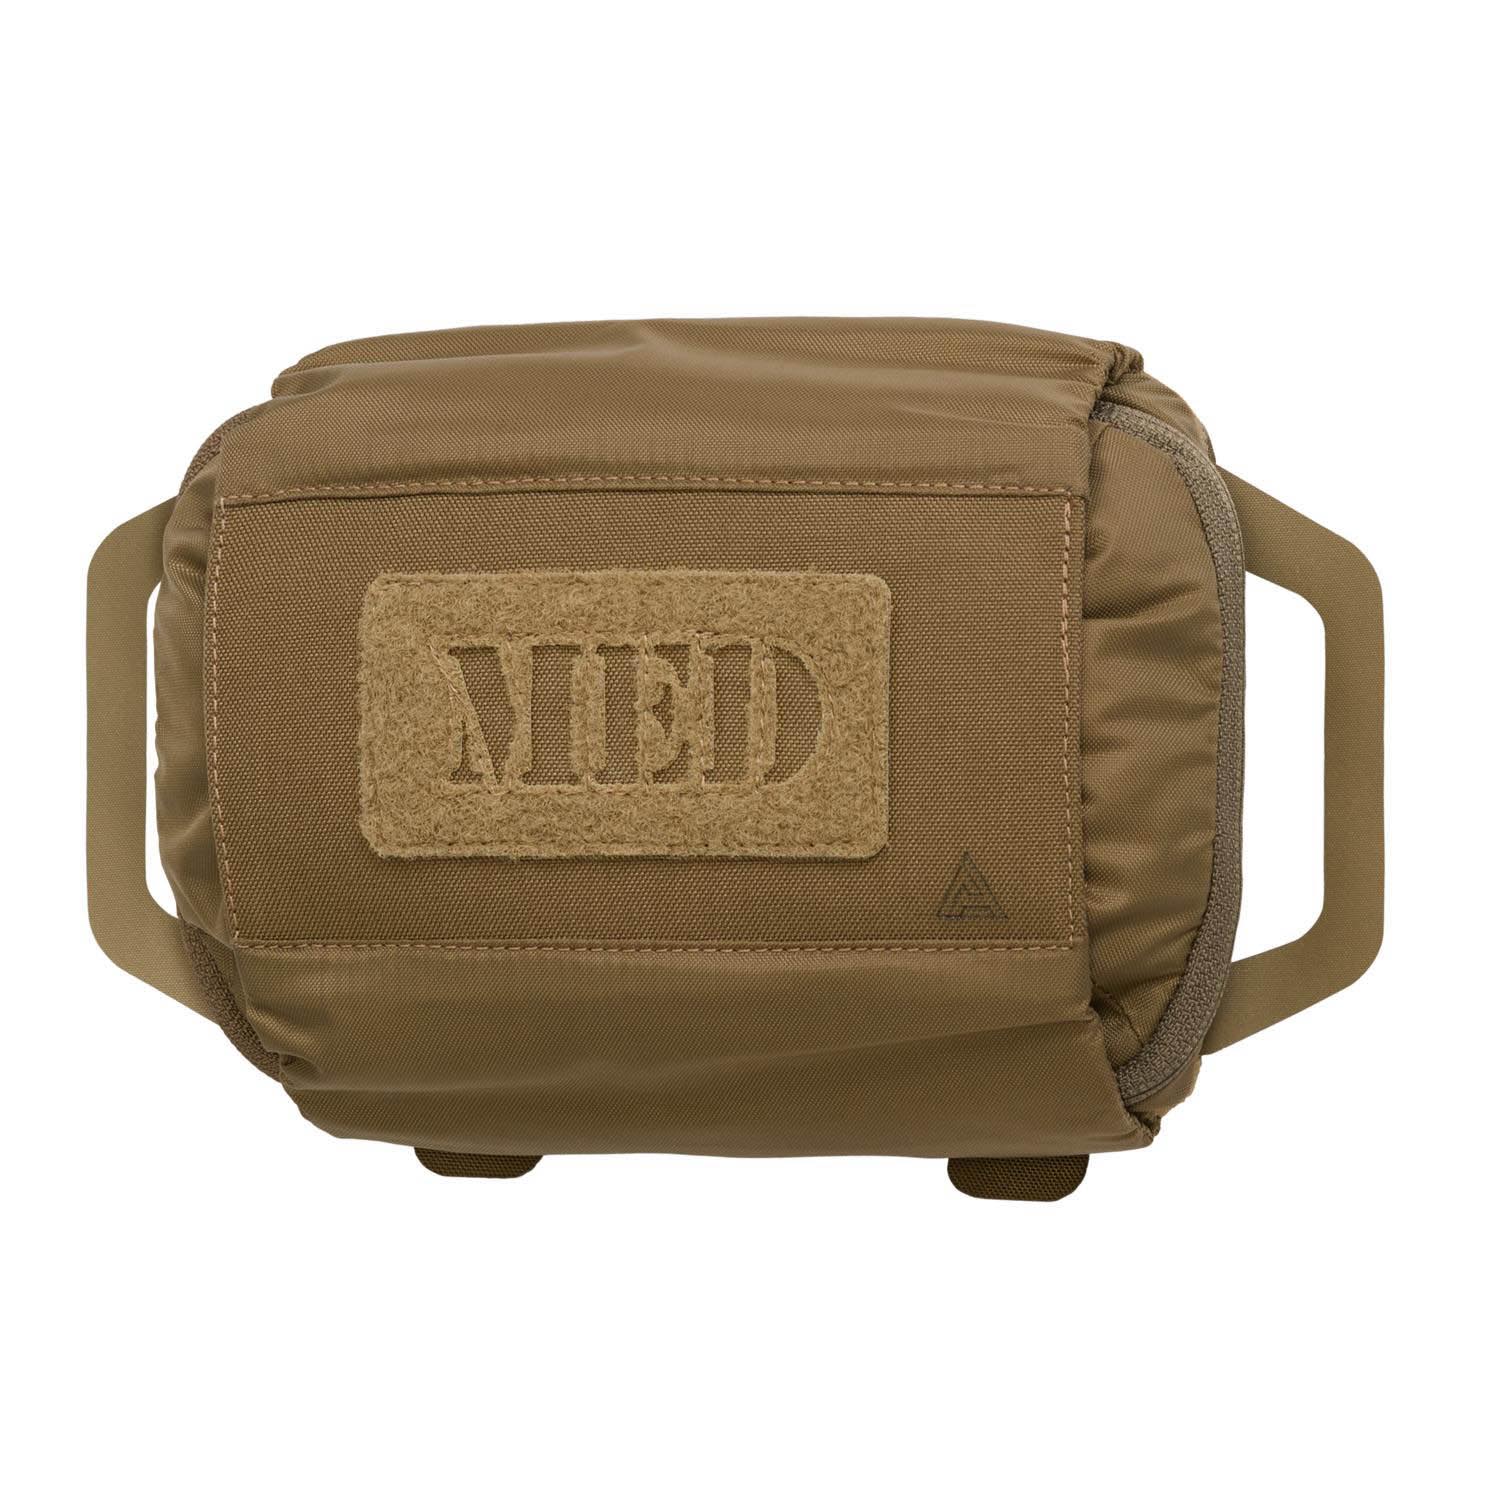 Direct Action Med Pouch Horizontal MKIII coyote brown